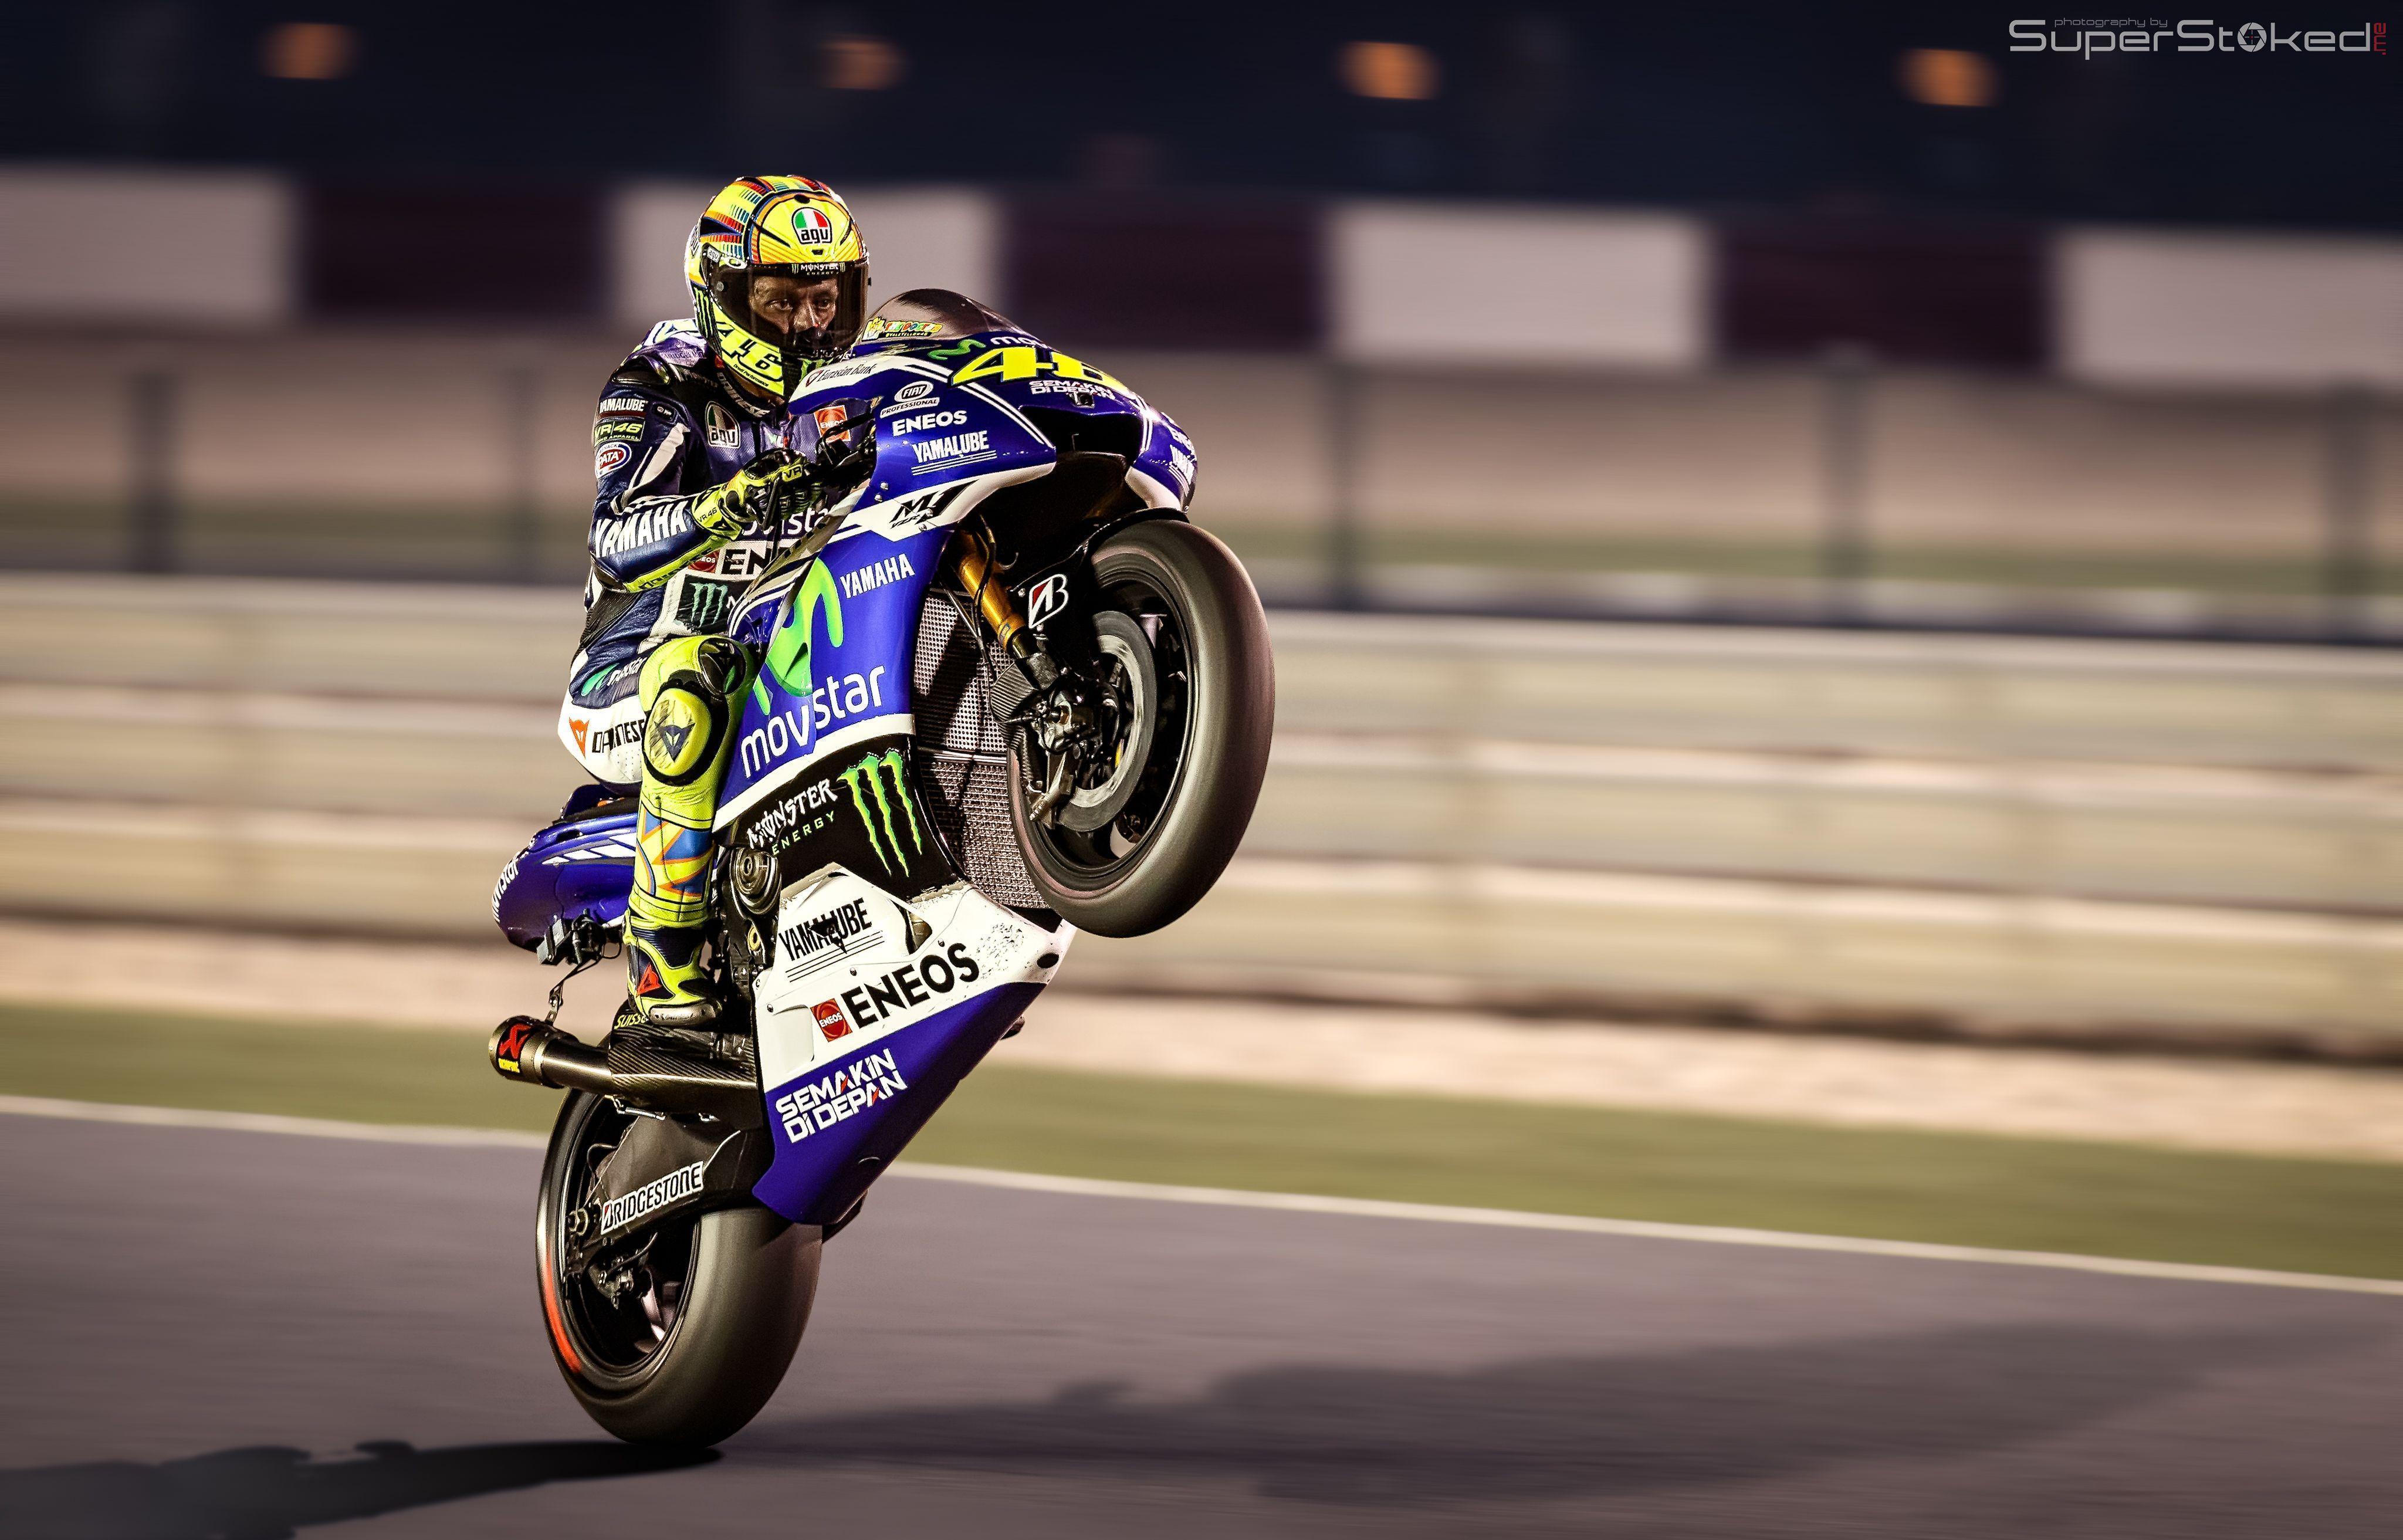 Wallpaper valentino rossi news 2016 and behlul wallpaper